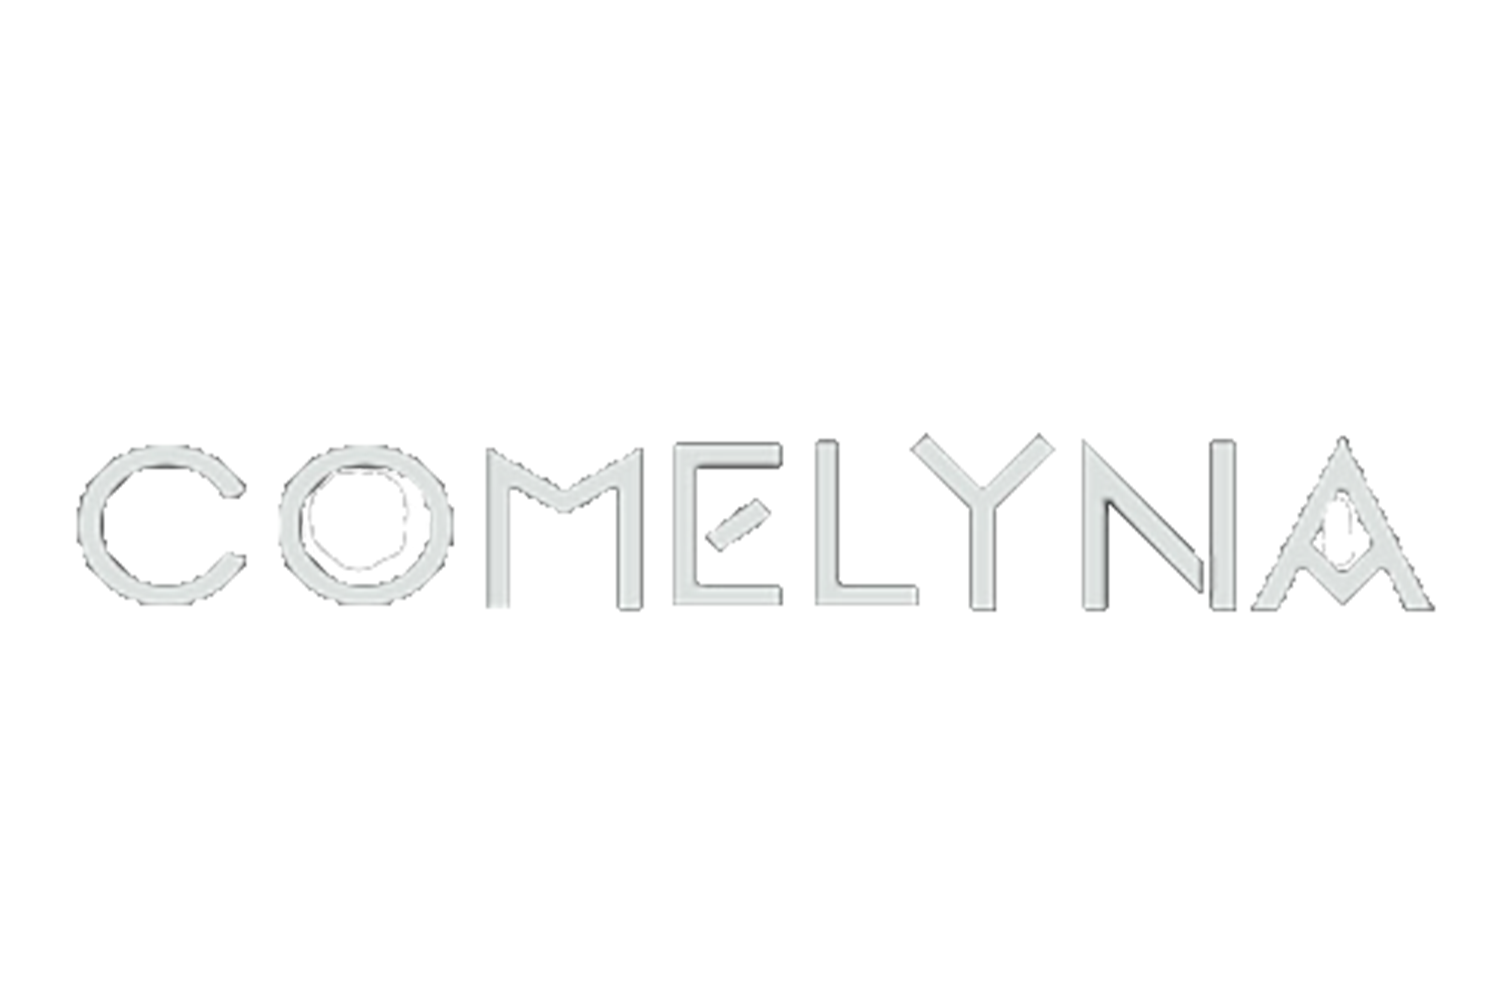 Comelyna